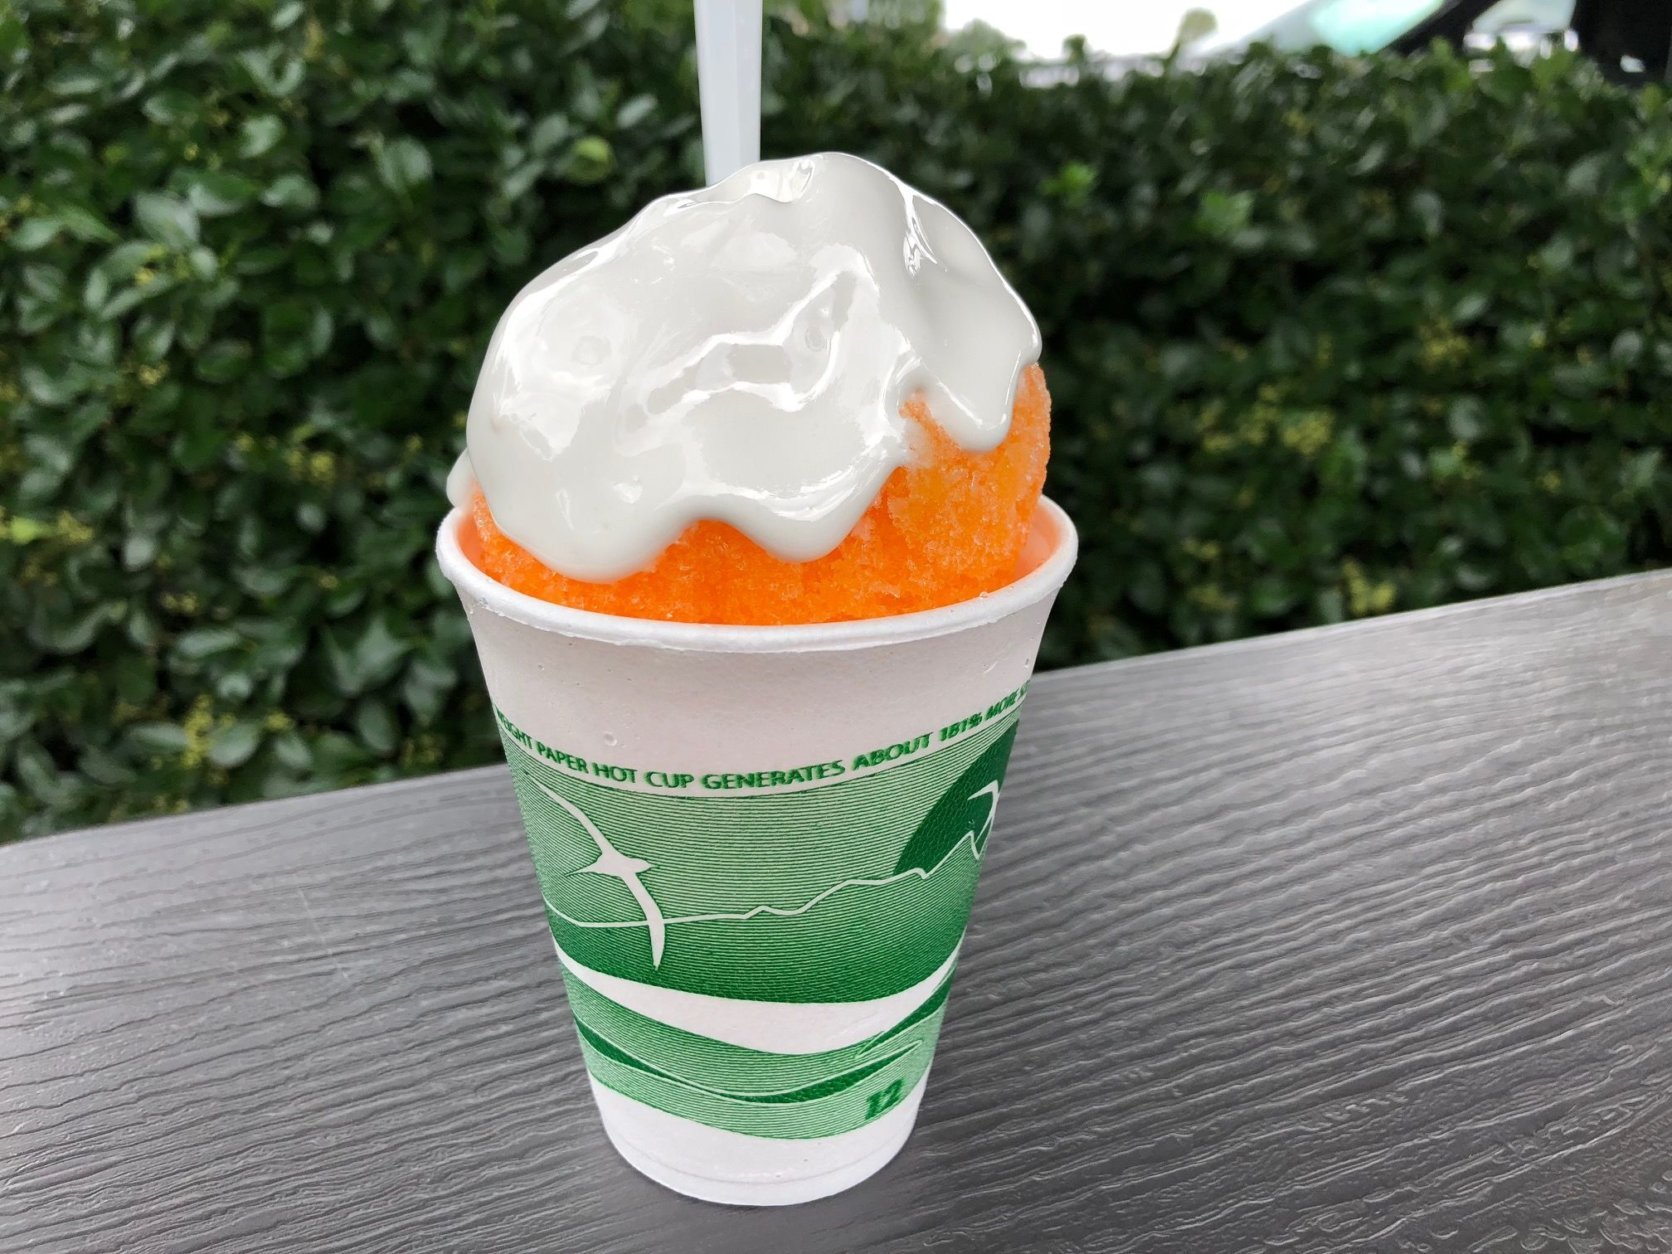 A snowball is a summer dessert made from finely shaved or chipped ice, covered in flavored syrup and topped with a marshmallow cream. (WTOP/Rachel Nania)